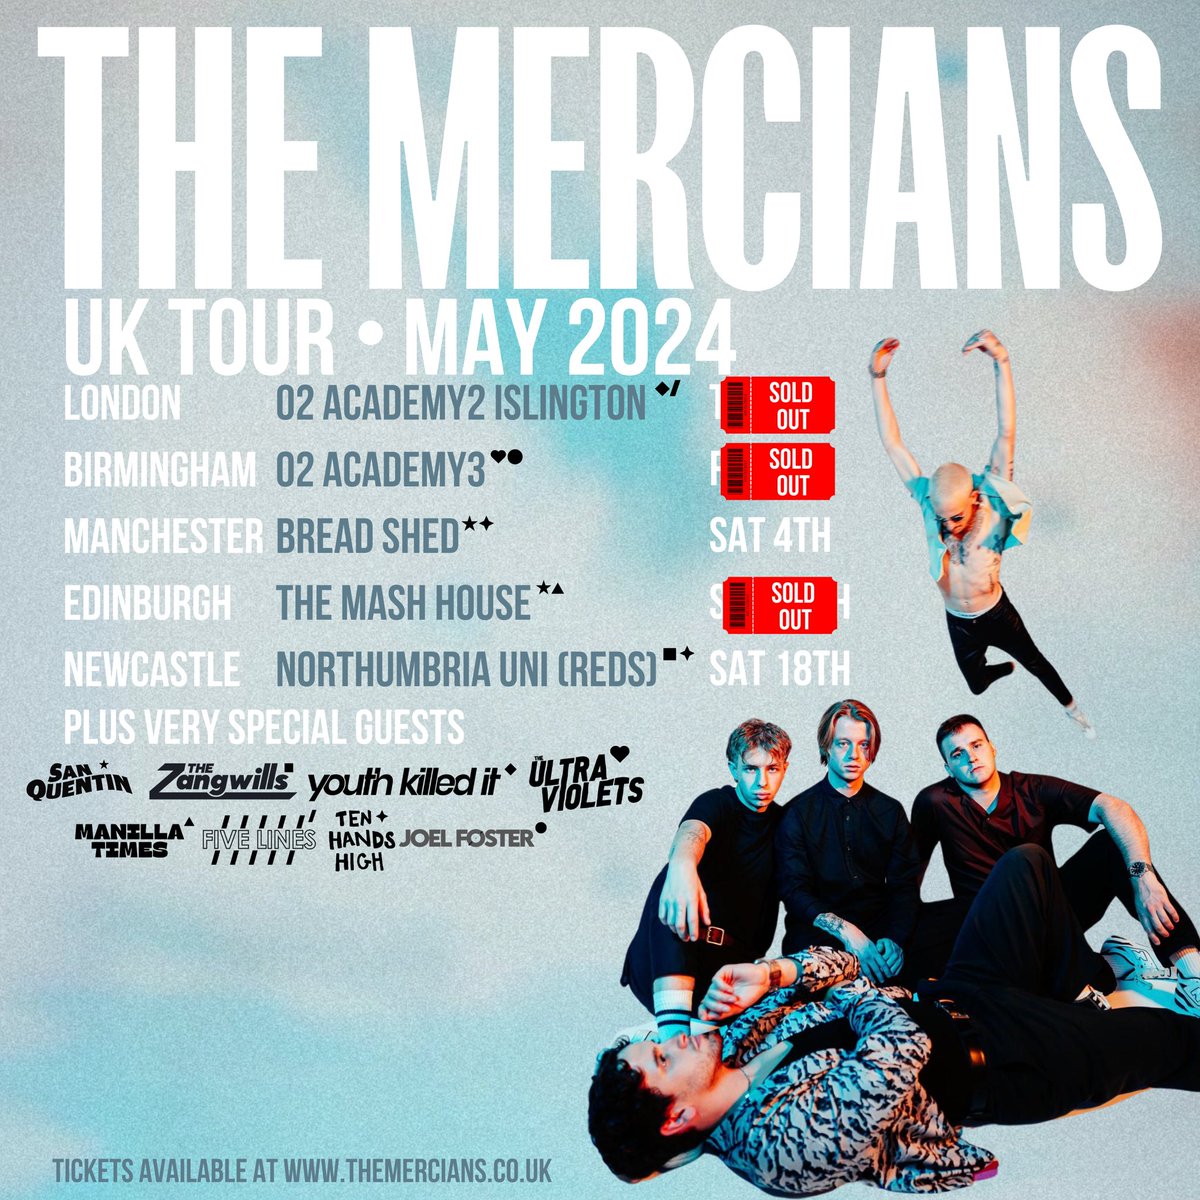 NEWCASTLE? Are ya listening? It feels great to announce that we will be supporting @TheMercians at their Newcastle show on May 18th 🕺🪩 This will be our first Newcastle appearance, and we are throughly looking forward to seeing what your limbs can do 🕺🕺🕺 See ya there x